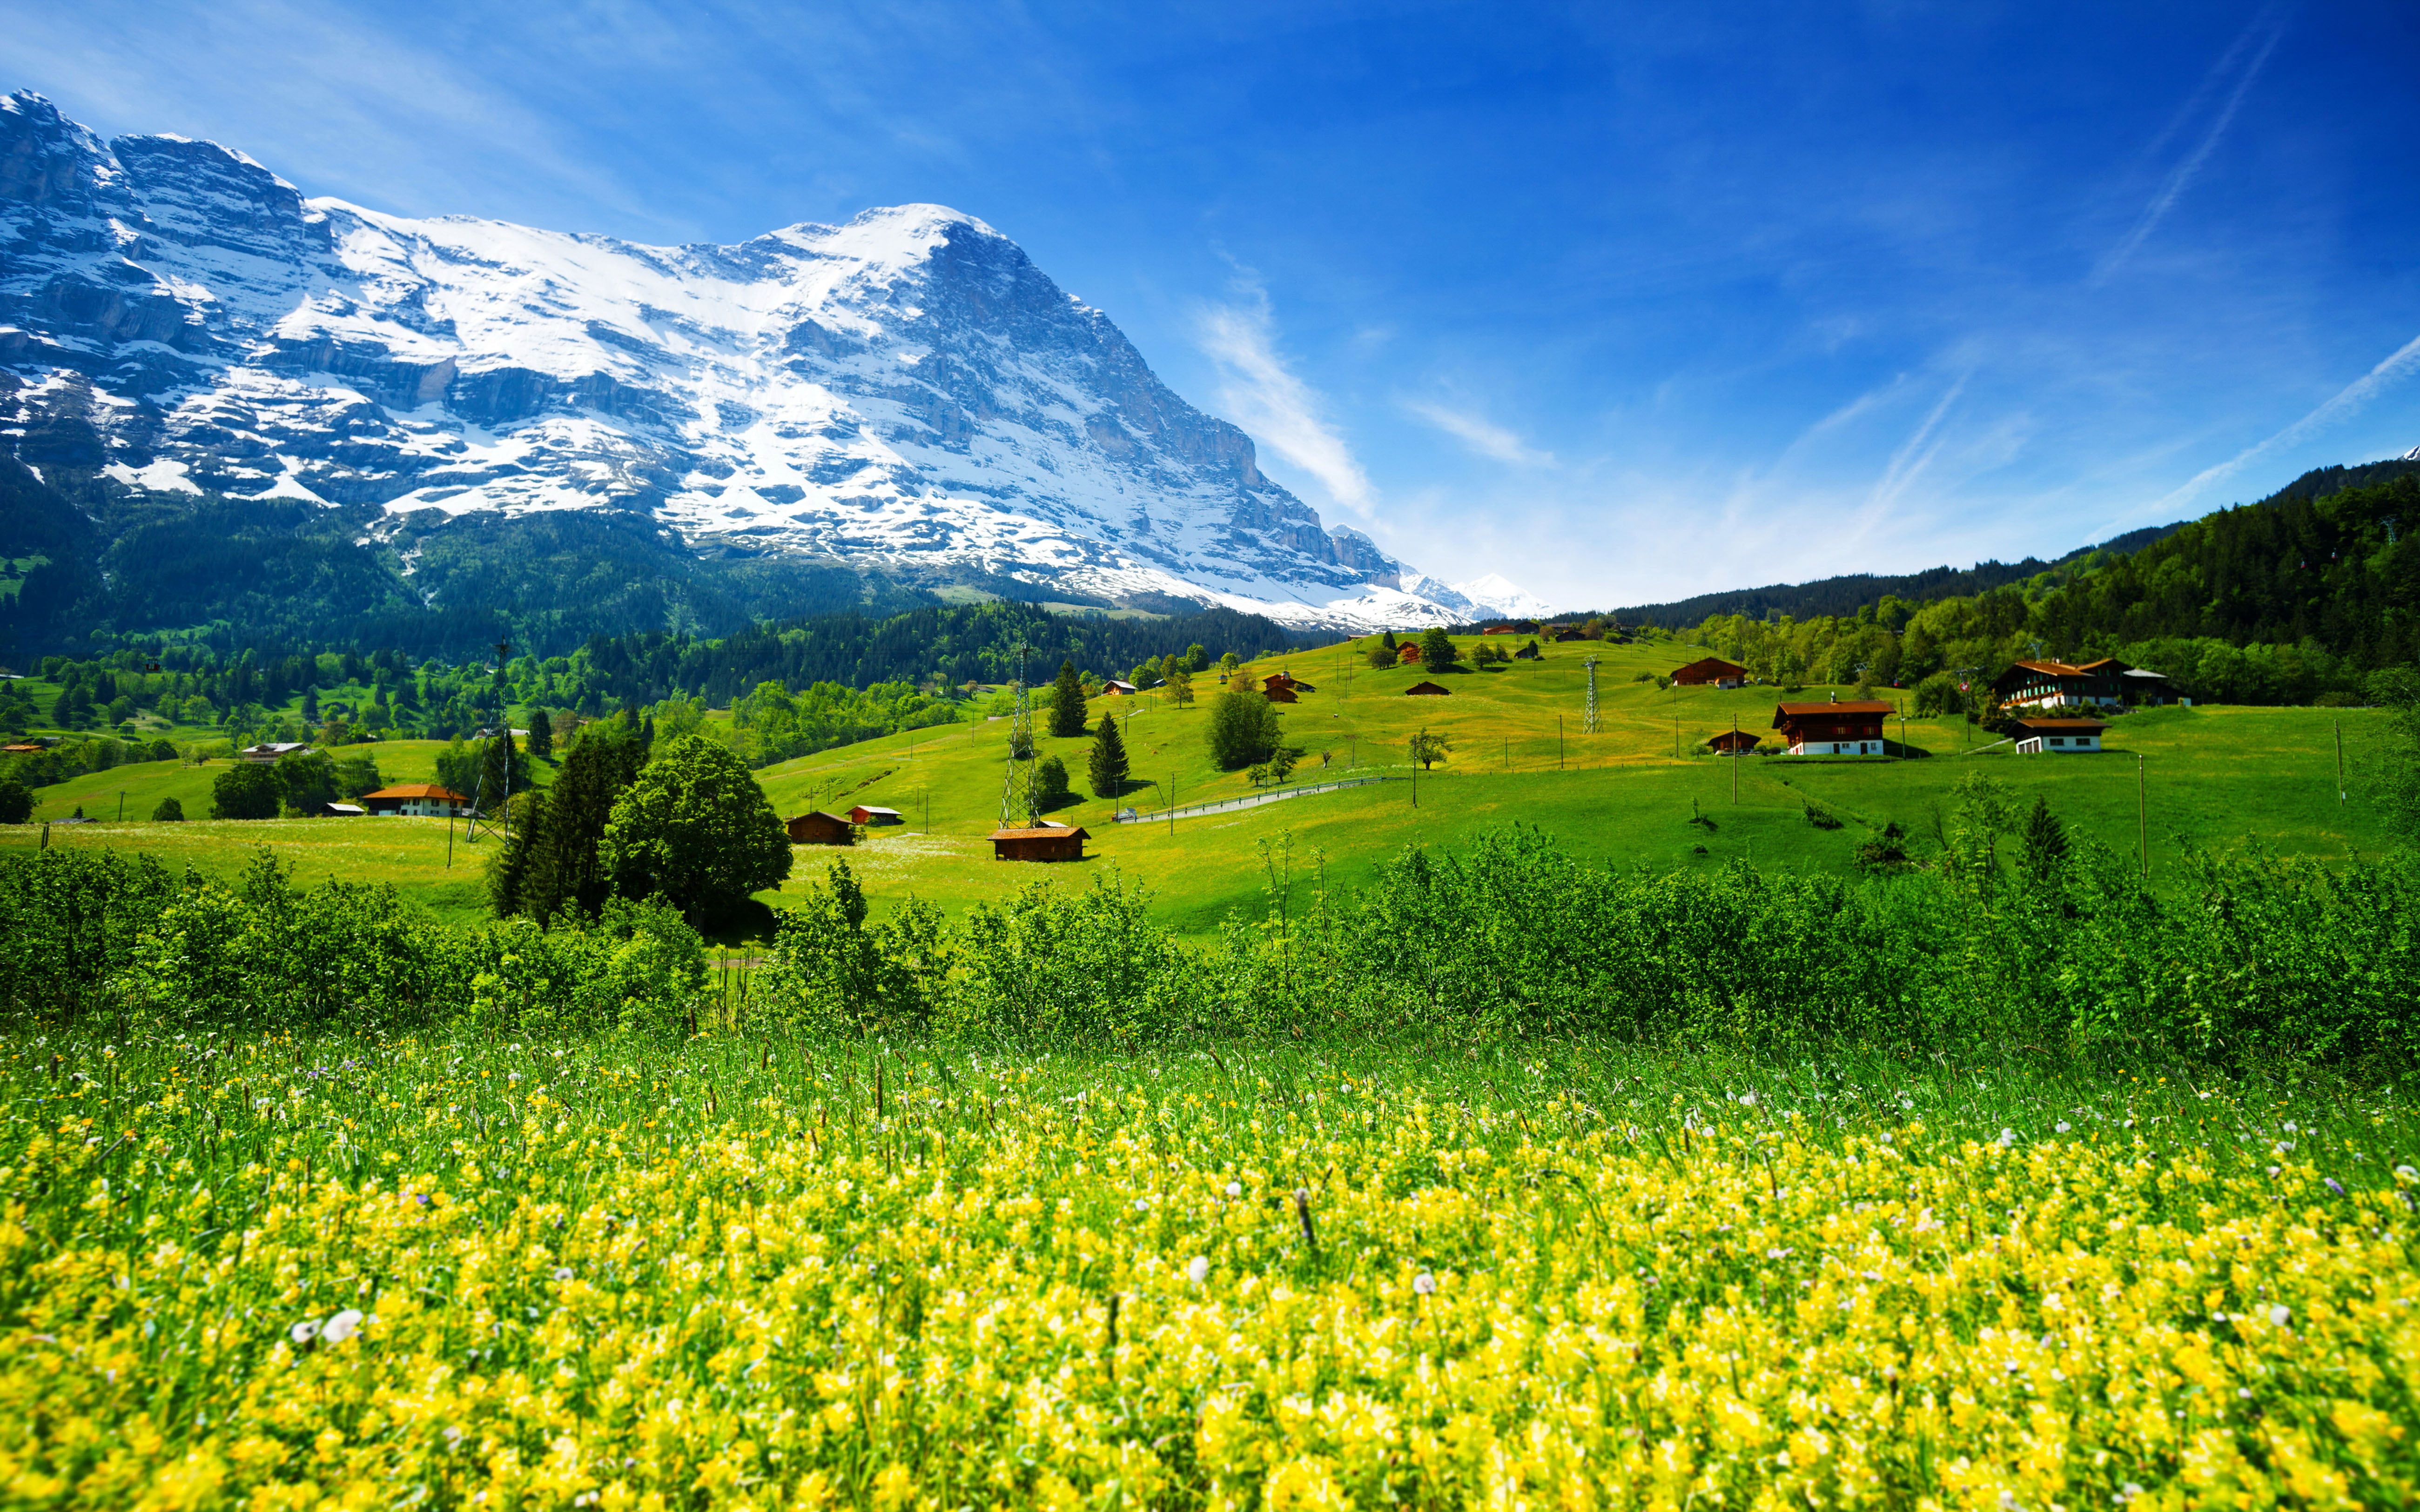 Spring Landscape Nature Switzerland Meadow With Yellow Flowers And Green Grass Mountainous. Switzerland wallpaper, iPhone wallpaper mountains, Mountain wallpaper